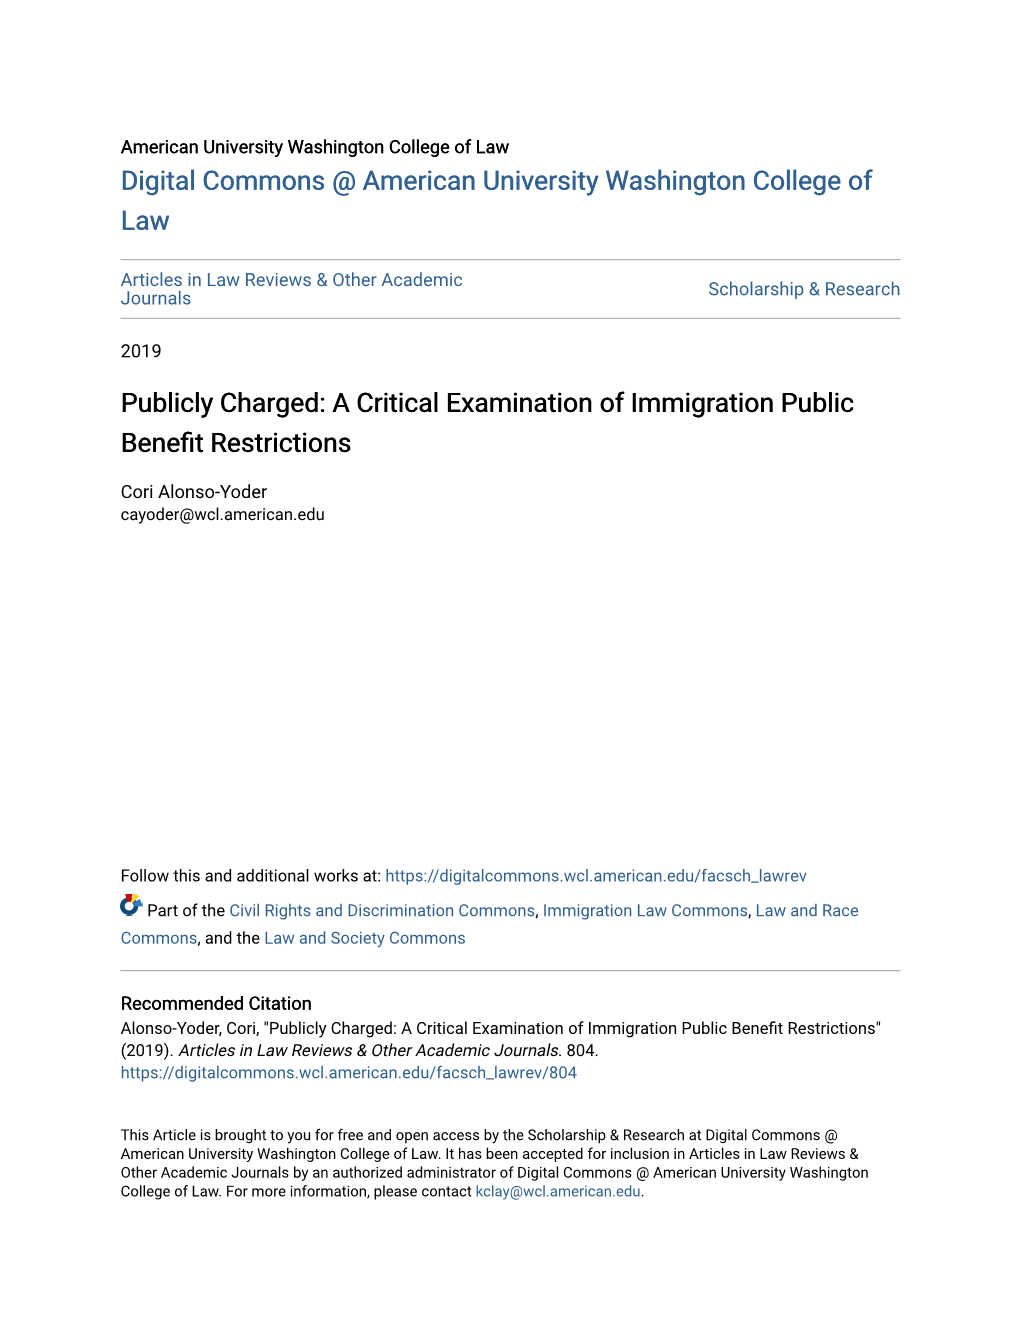 A Critical Examination of Immigration Public Benefit Restrictions